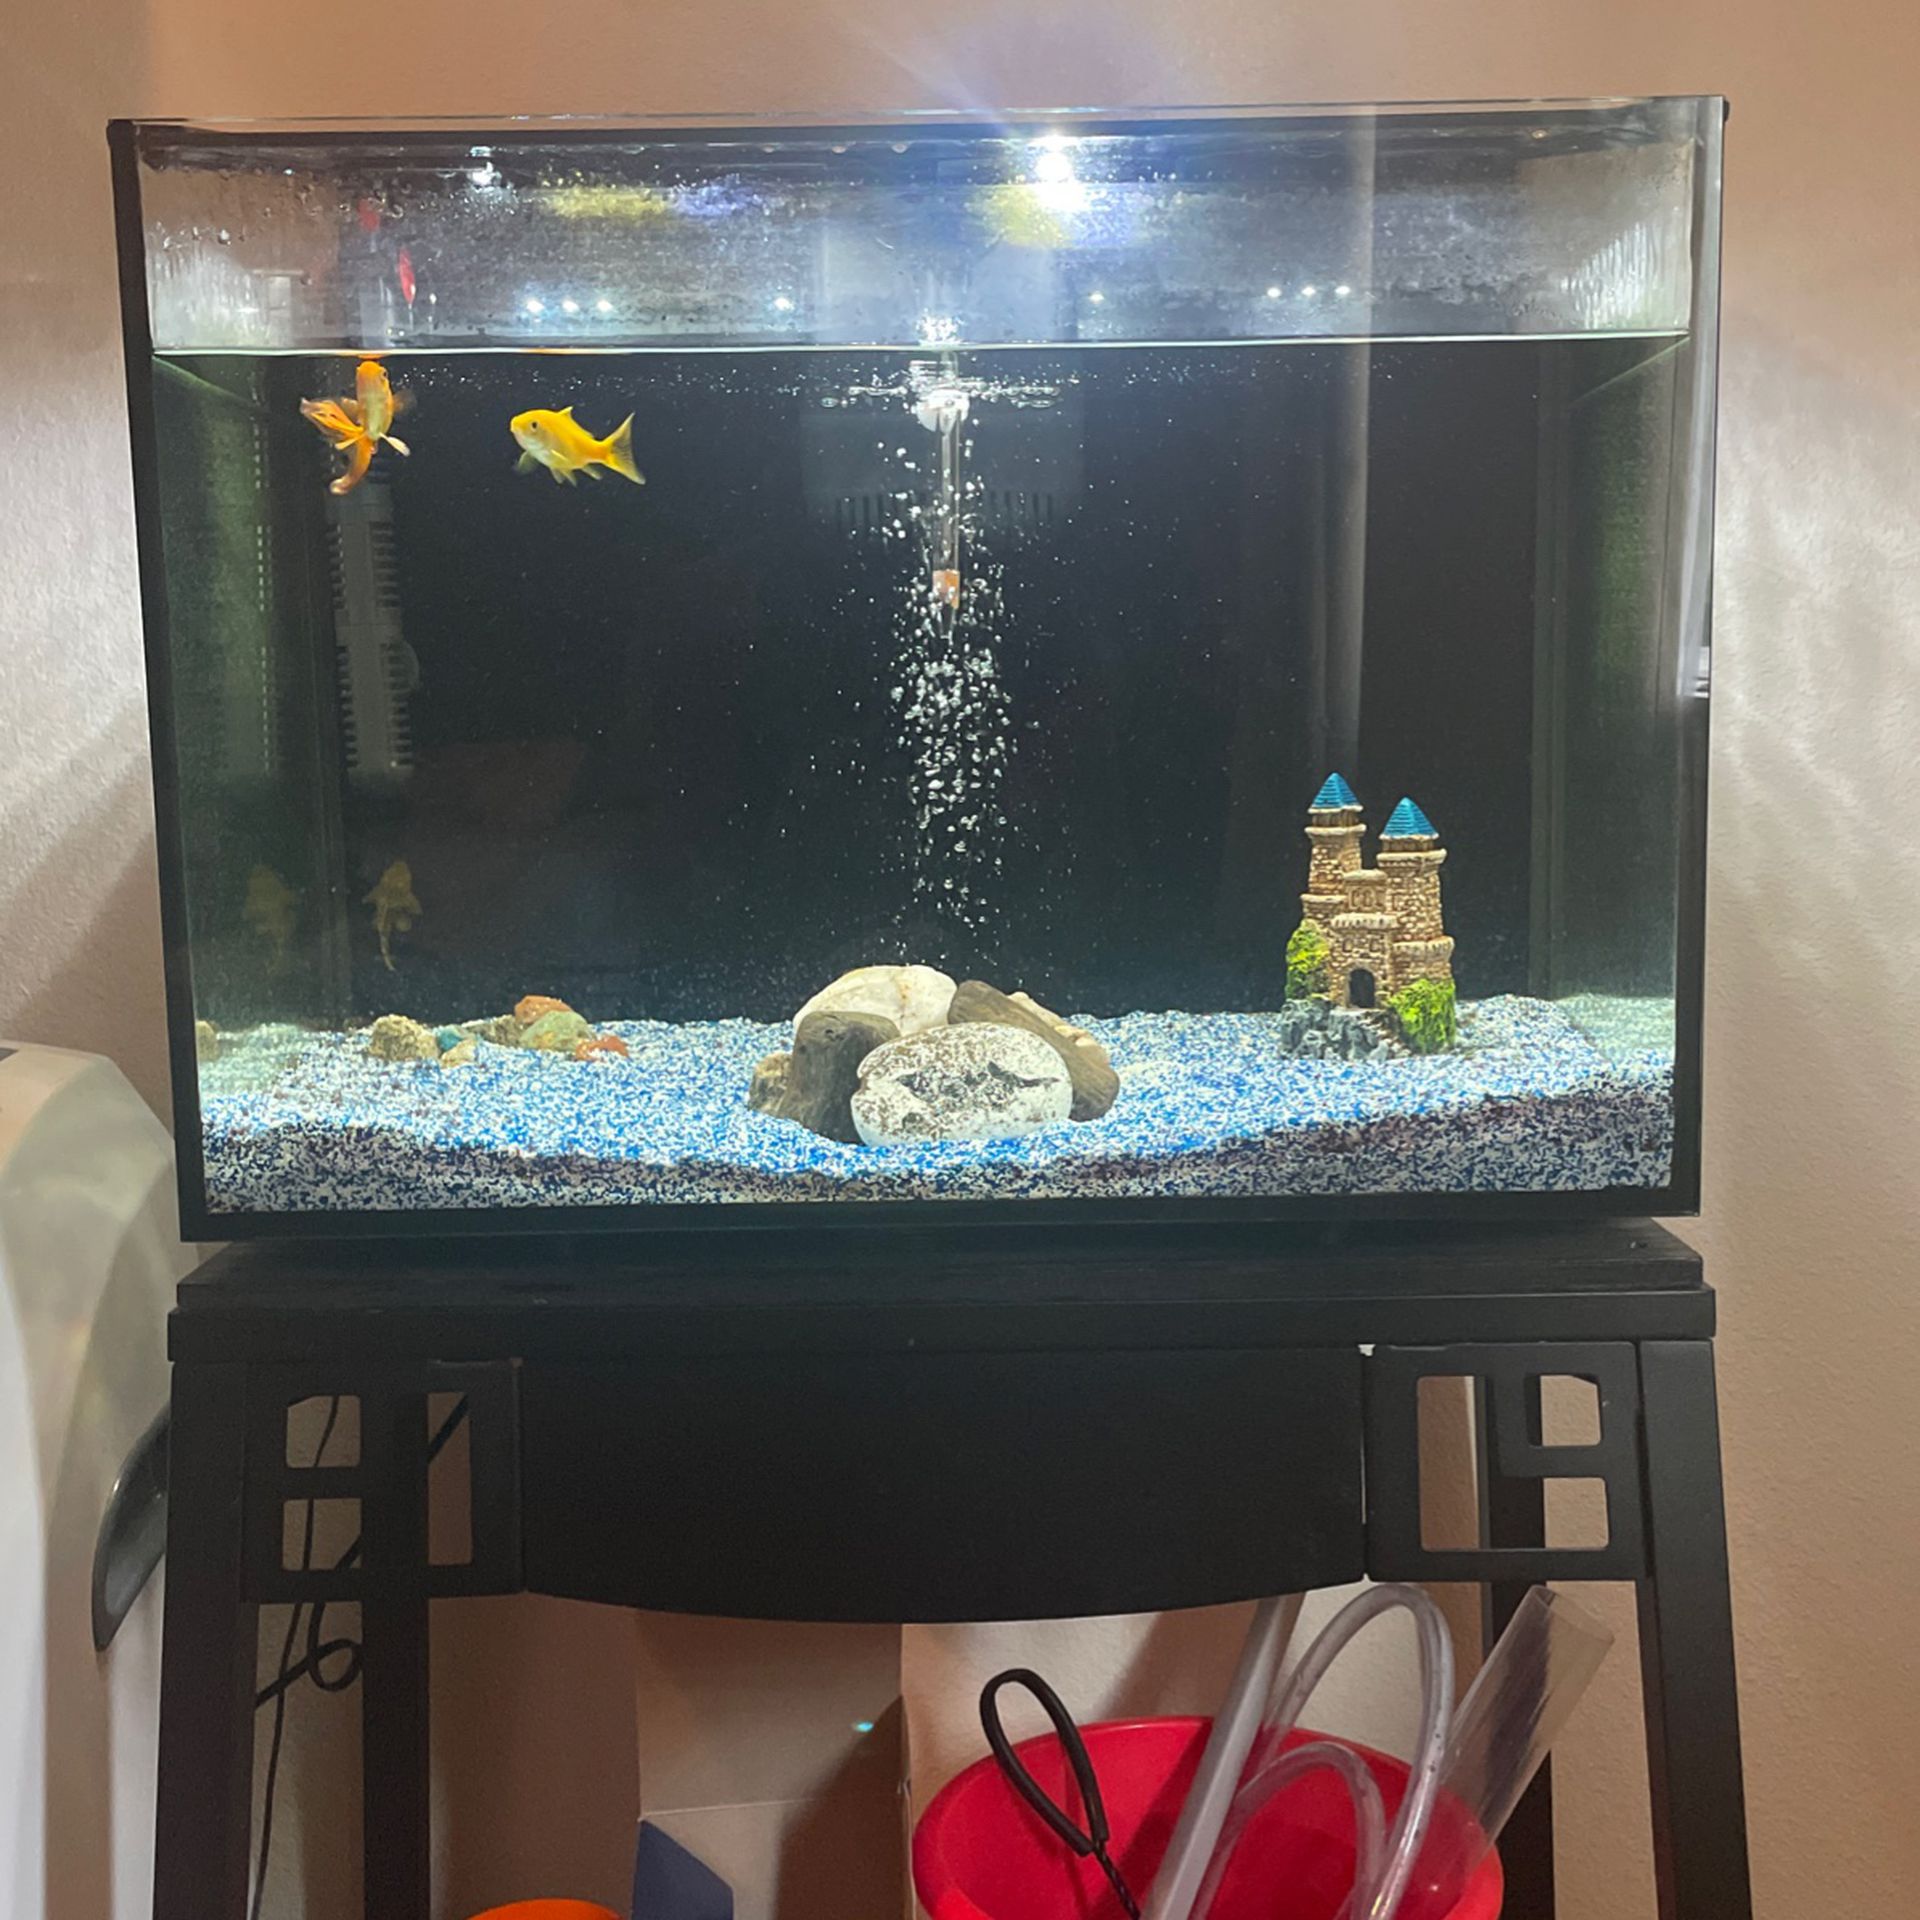 20 Gallon Fish Tank With Stand Filter Heater And Fish!